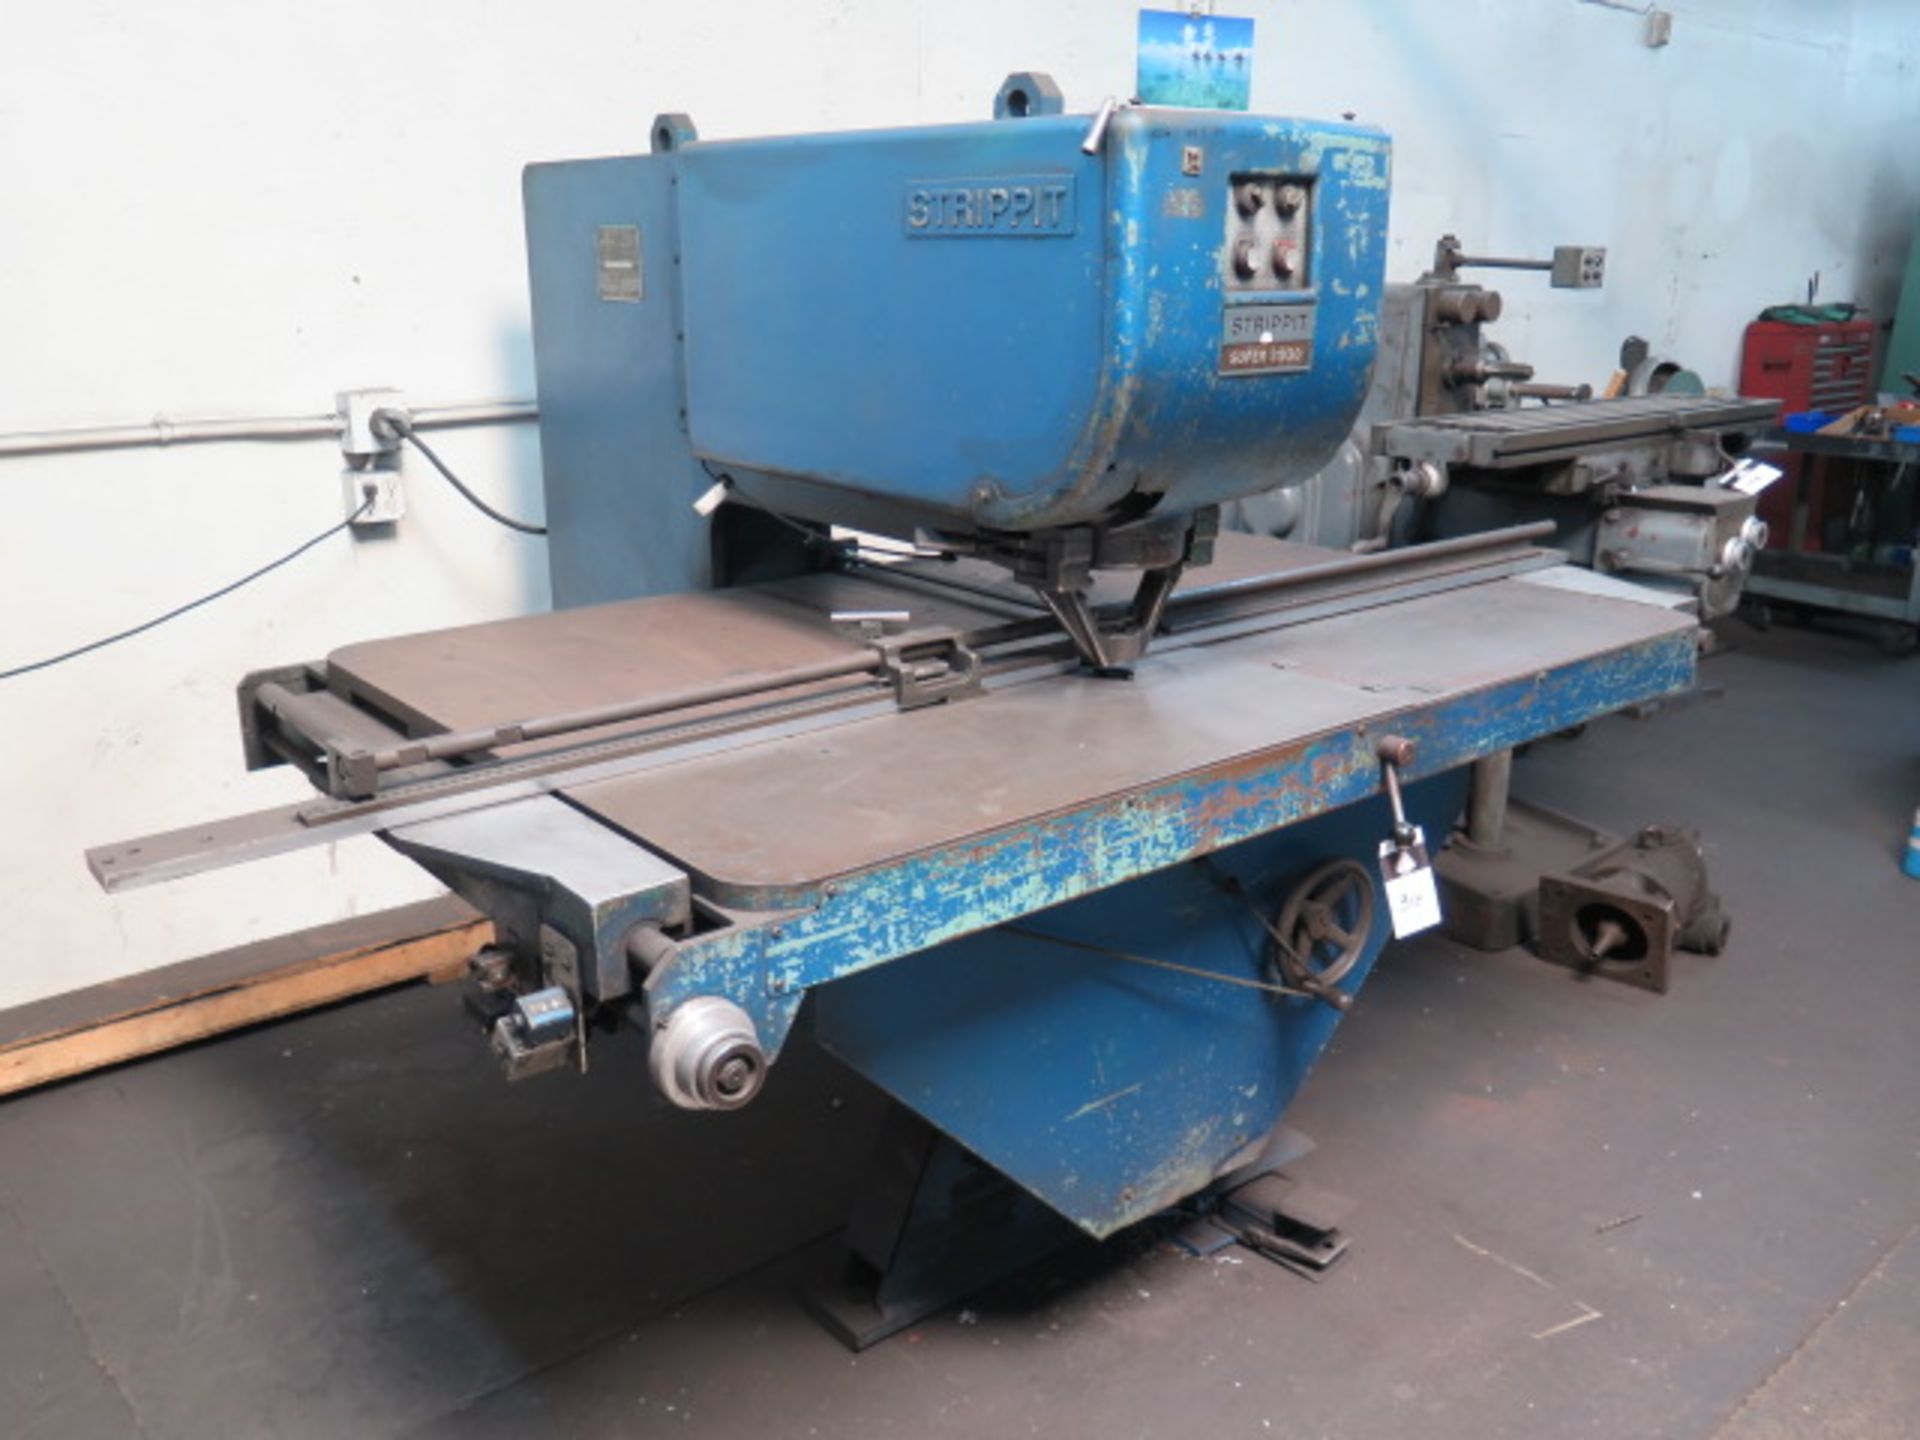 Strippit Super 30/30 Sheet Metal Fabrication Punch Press w/ Fence System (SOLD AS-IS - NO WARRANTY) - Image 2 of 18